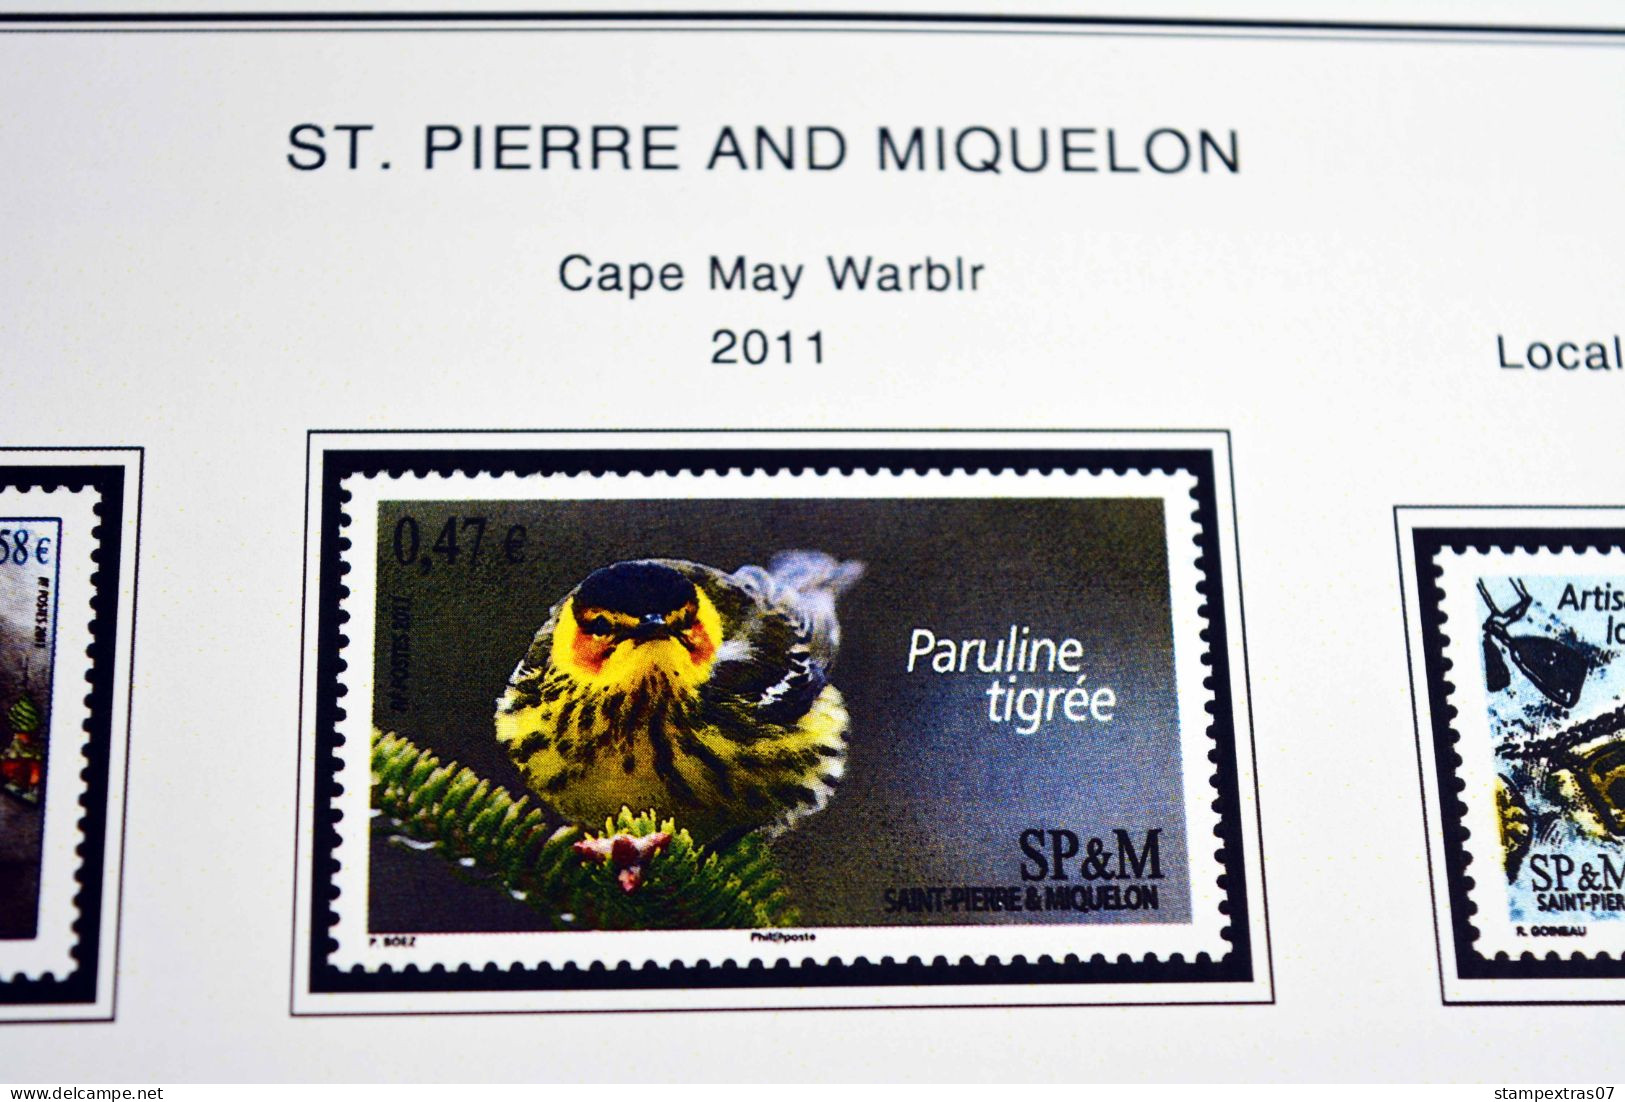 COLOR PRINTED SAINT PIERRE AND MIQUELON 2011-2023 STAMP ALBUM PAGES (49 Illustrated Pages) >> FEUILLES ALBUM - Pre-printed Pages